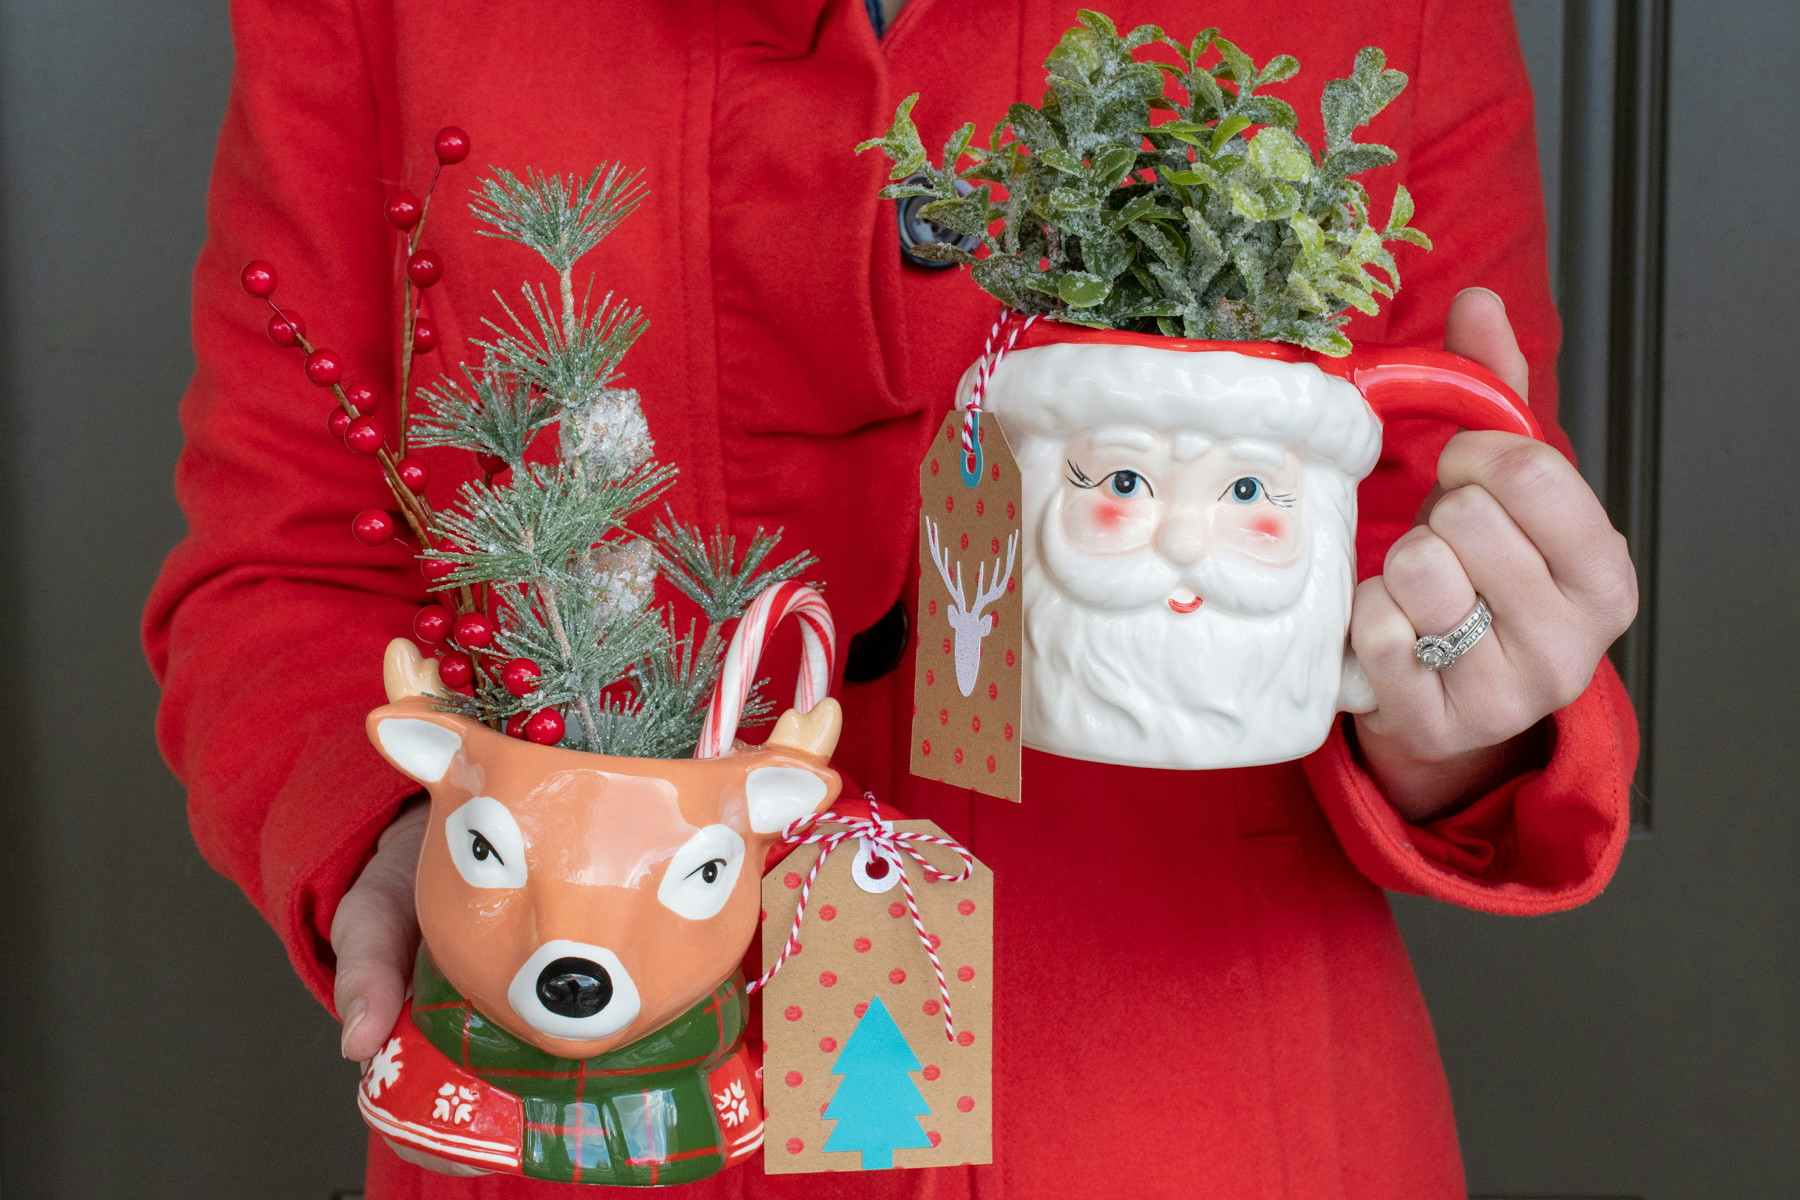 A person holding two Christmas mugs filled with greenery.